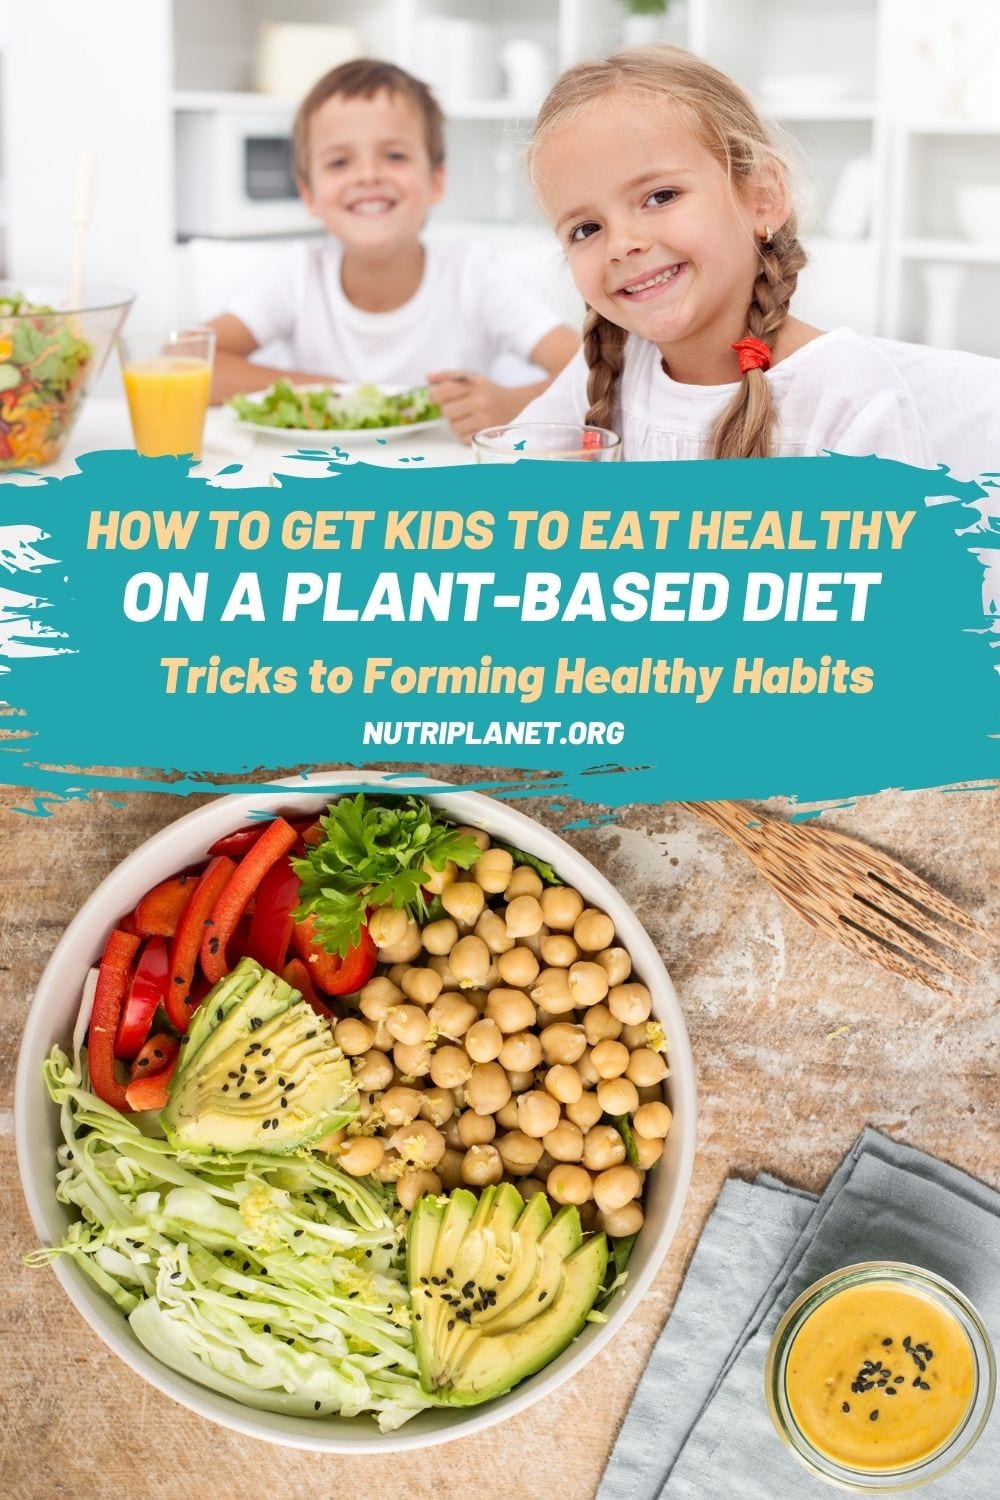 Learn how to get kids to eat healthy on a plant-based diet. Tricks and hacks on forming healthy habits right from the beginning. 